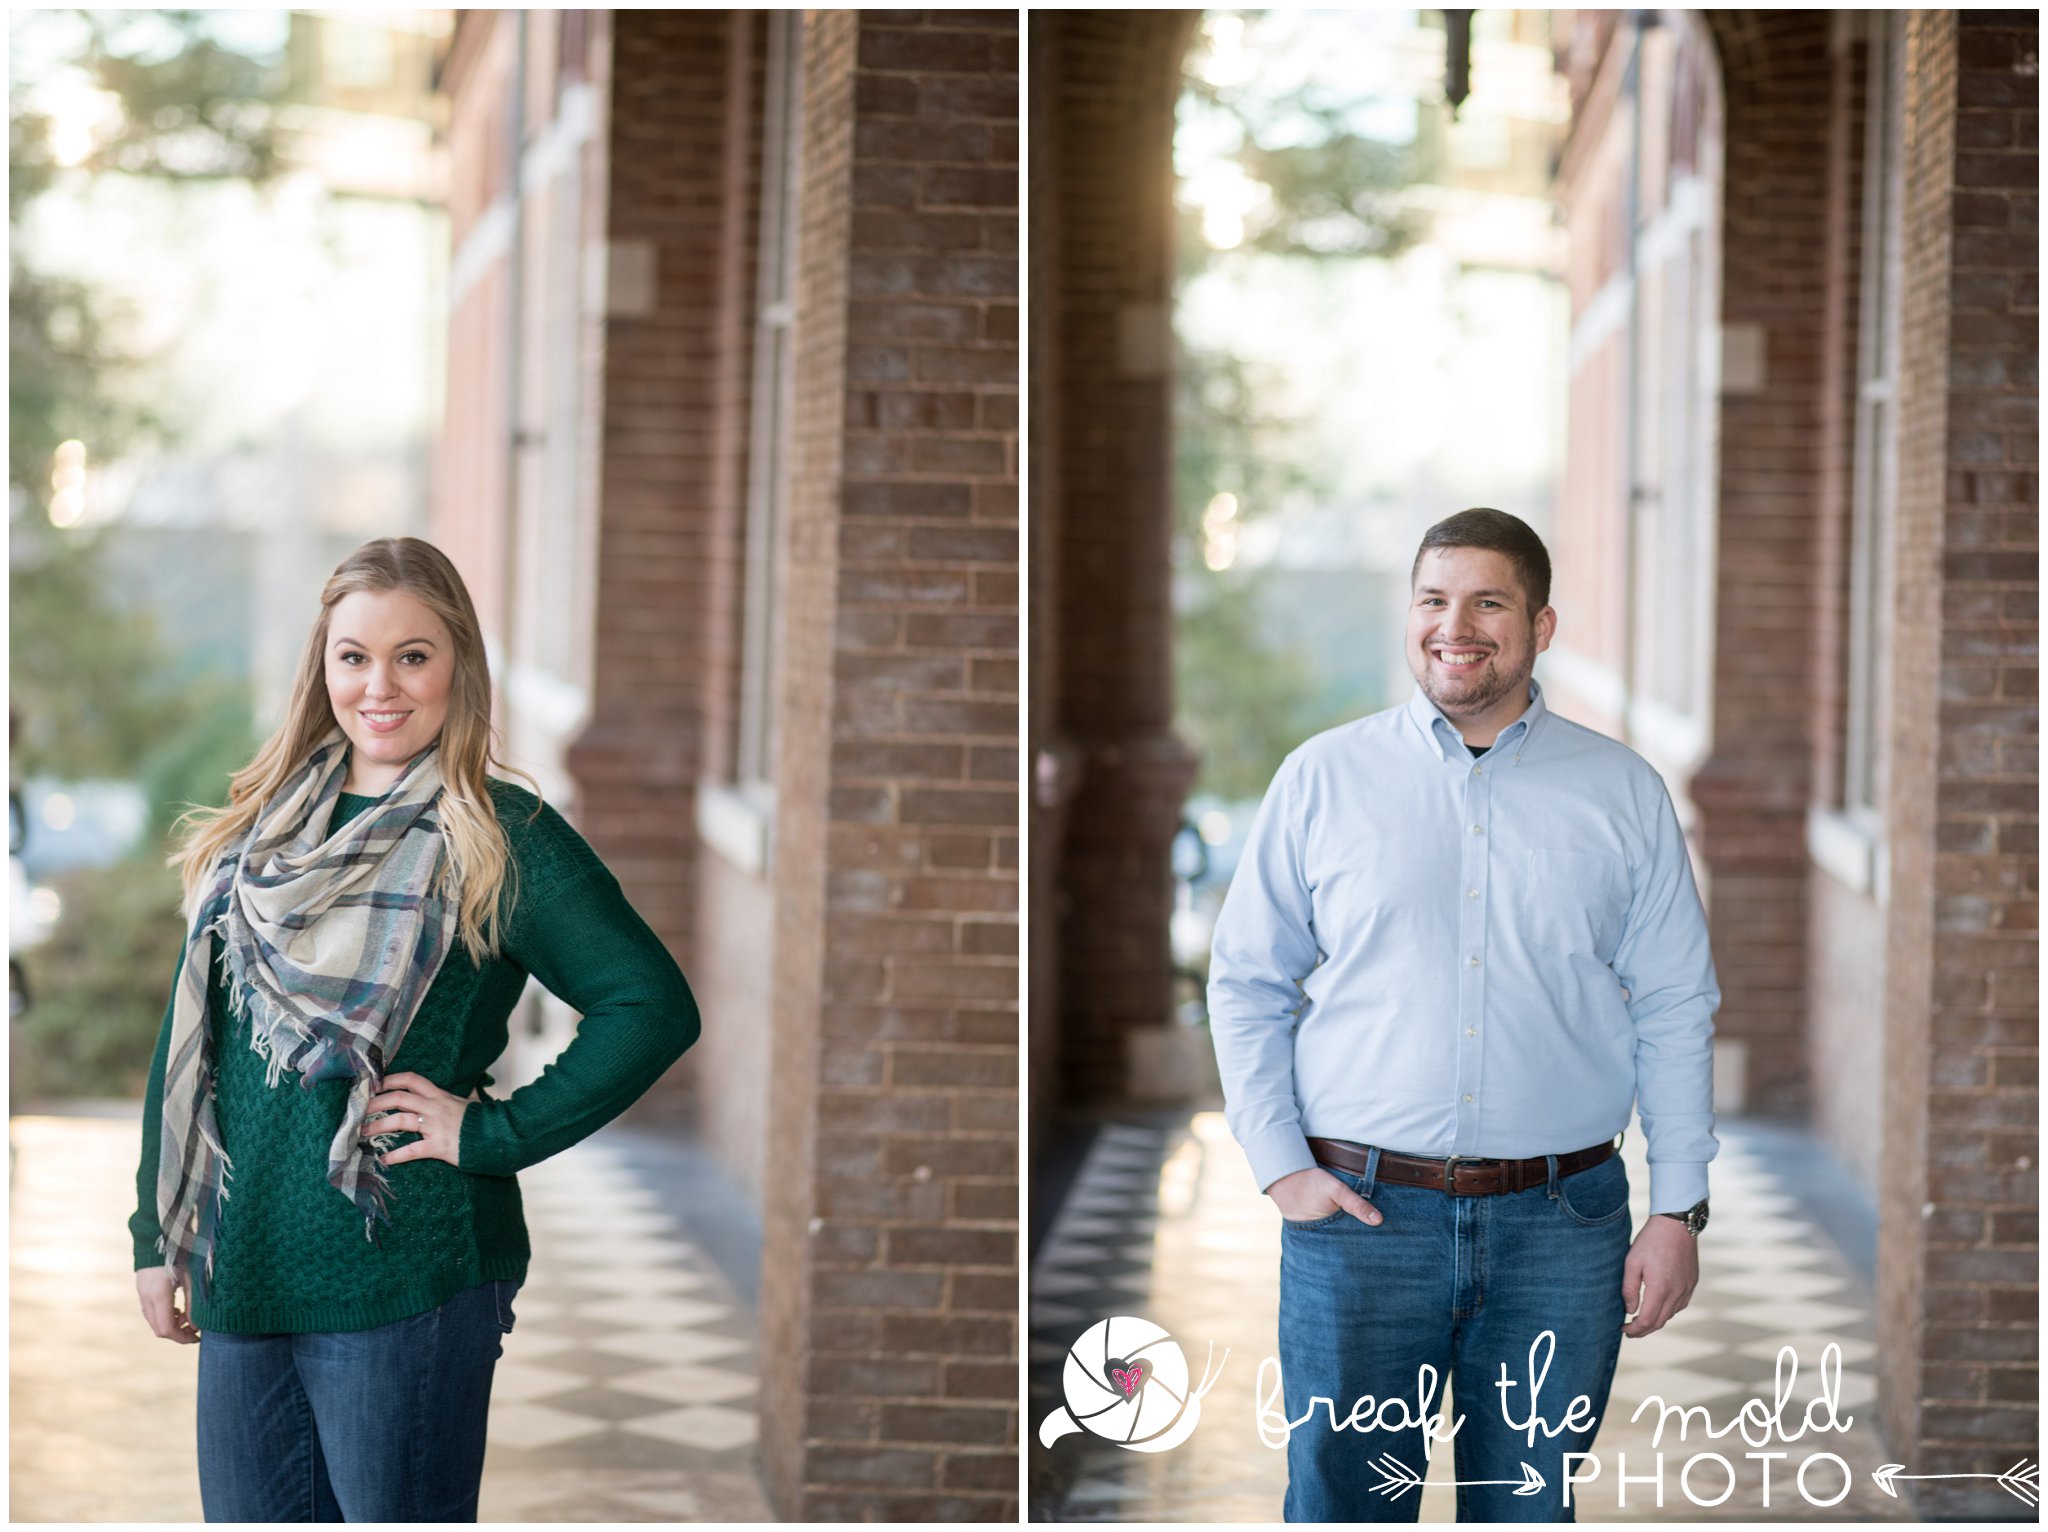 break-the-mold-photo-engagement-session-downtown-knoxville-try-before-you-buy_9876.jpg